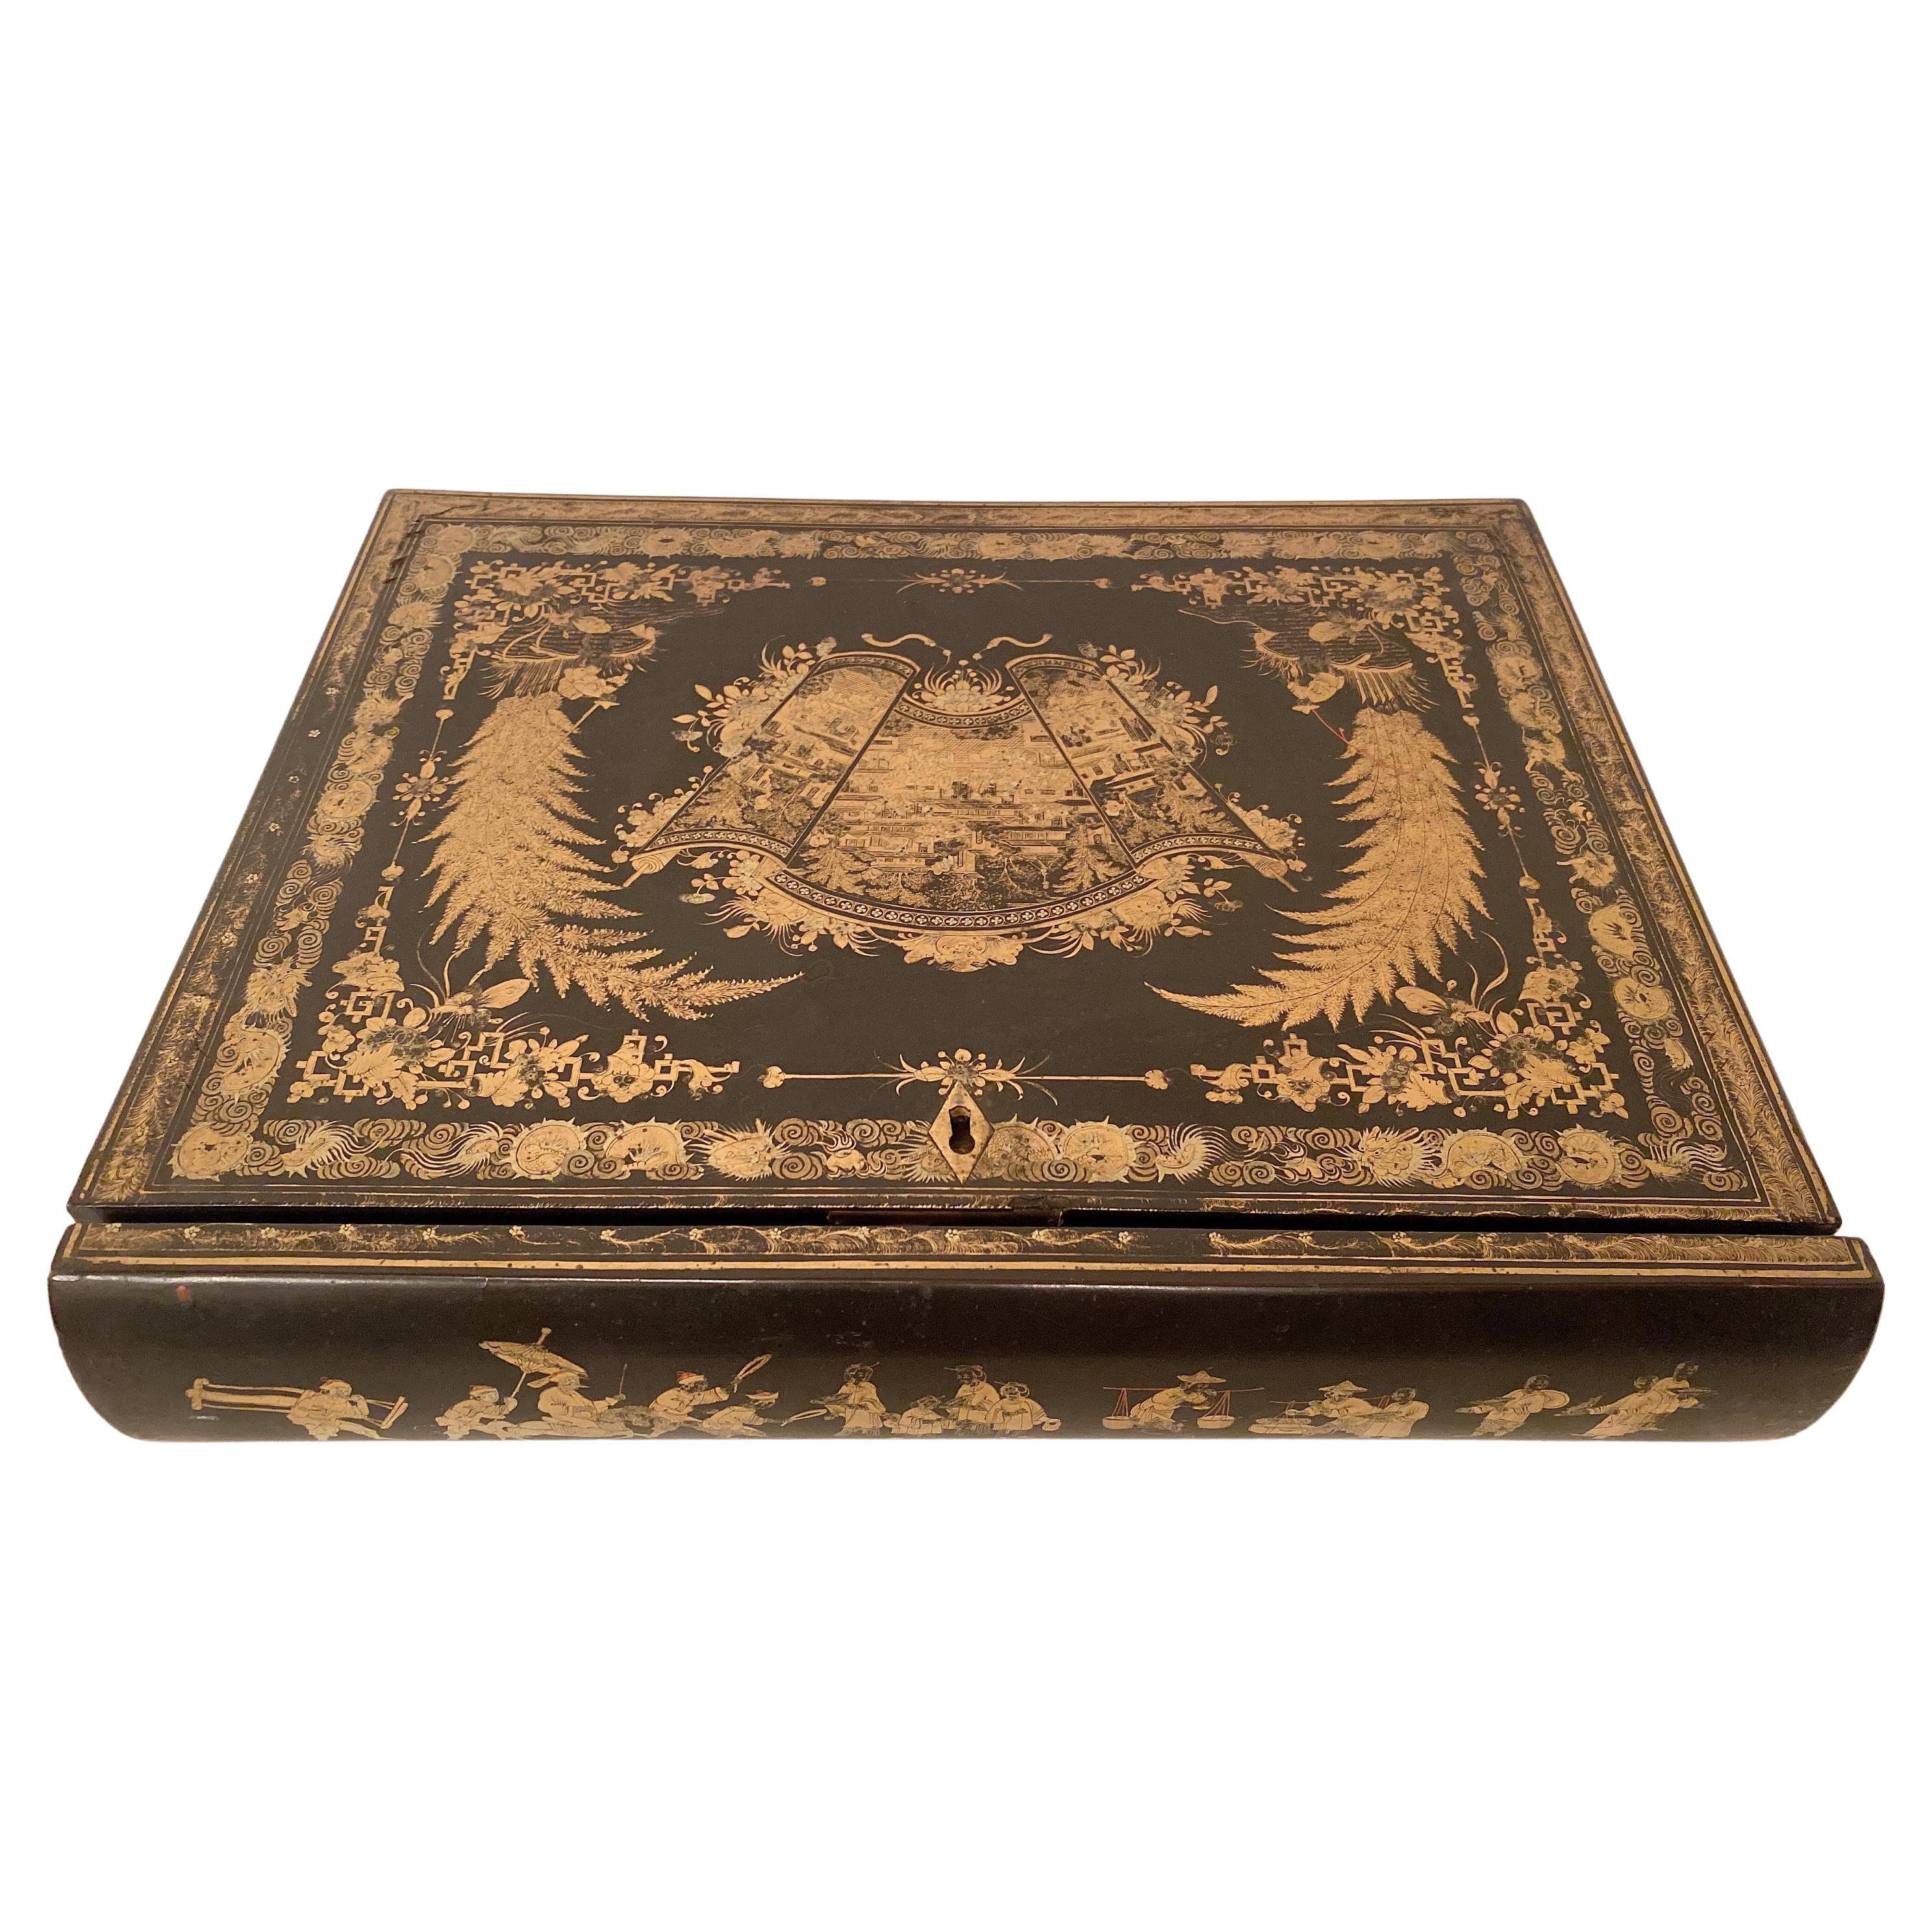 Rare Early 19th Century Chinese Gilt Black Lacquer Writing Box